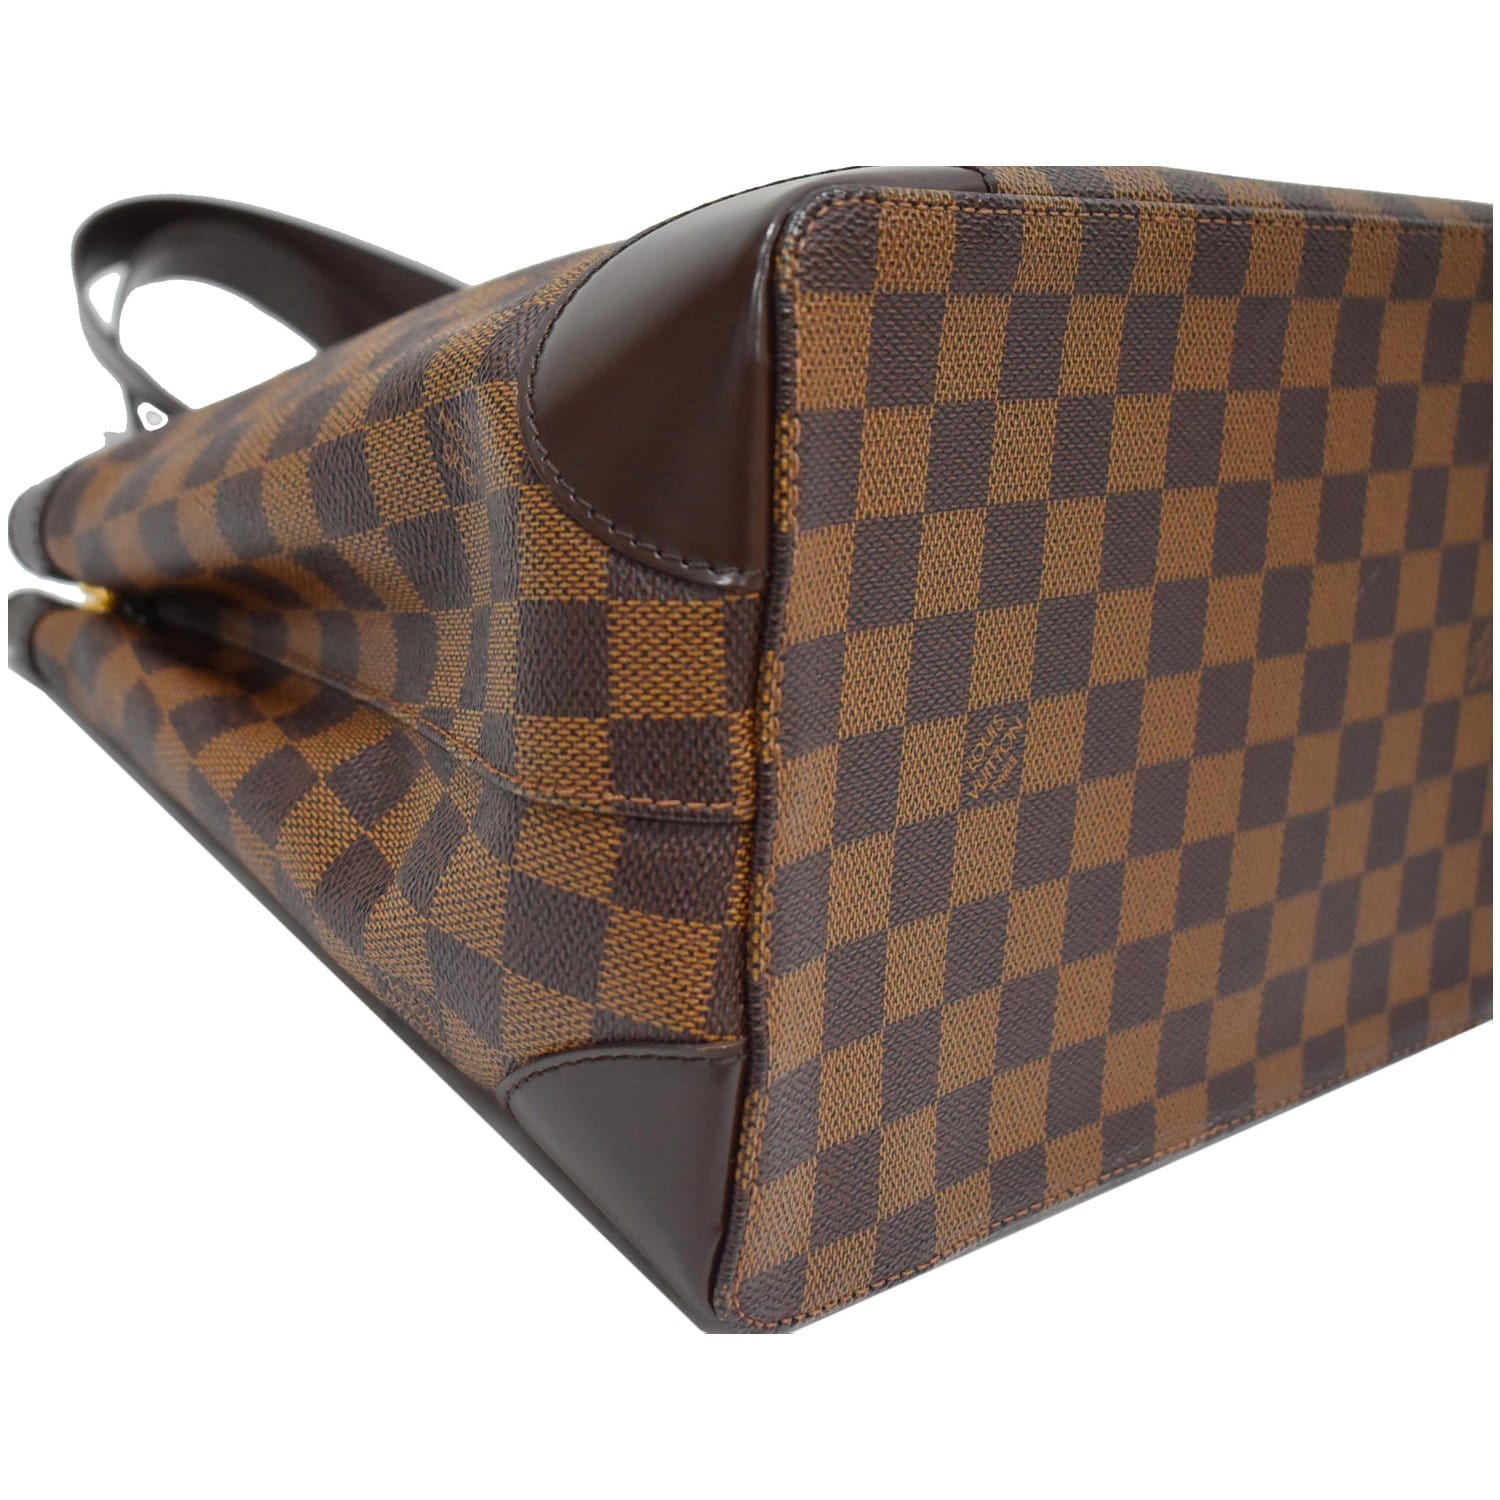 Louis Vuitton 2011 pre-owned Hampstead MM Tote Bag - Farfetch